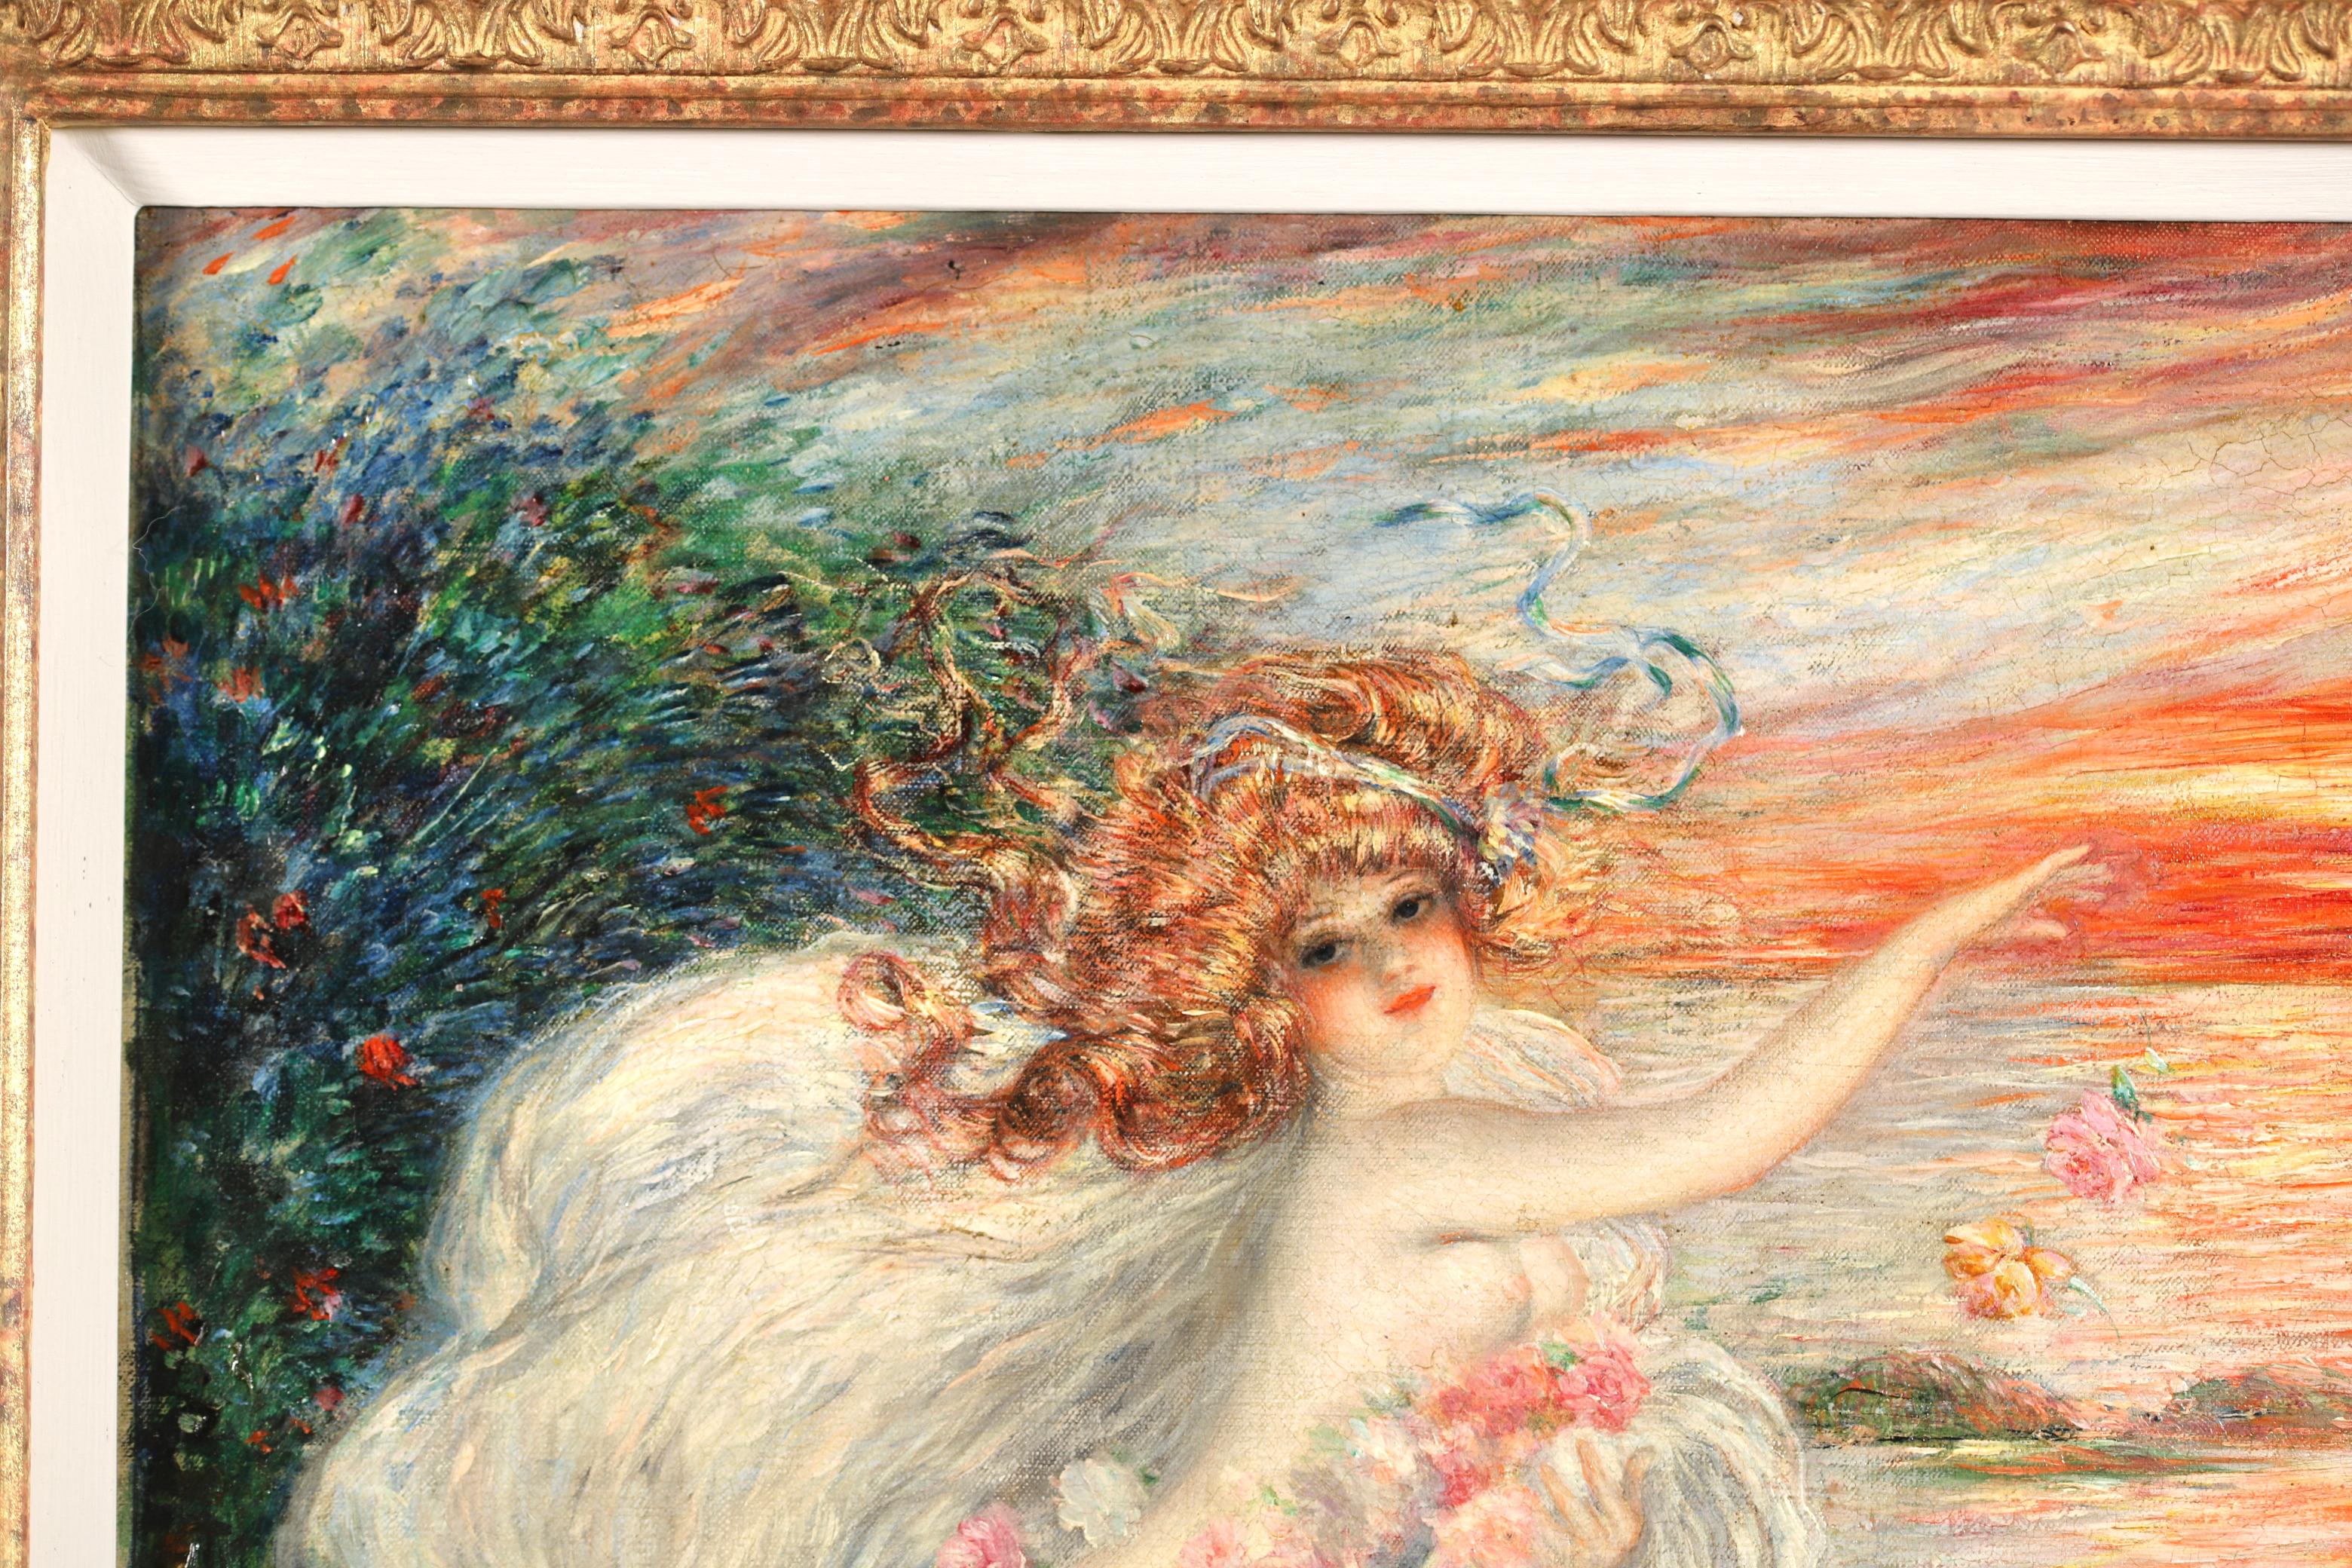 Signed impressionist figure in landscape oil on canvas circa 1895 by French painter, illustrator and cartoonist Abel Faivre. The work depicts a water nymph with flowing red hair throwing flowers into a river. There are butterflies by her side. The